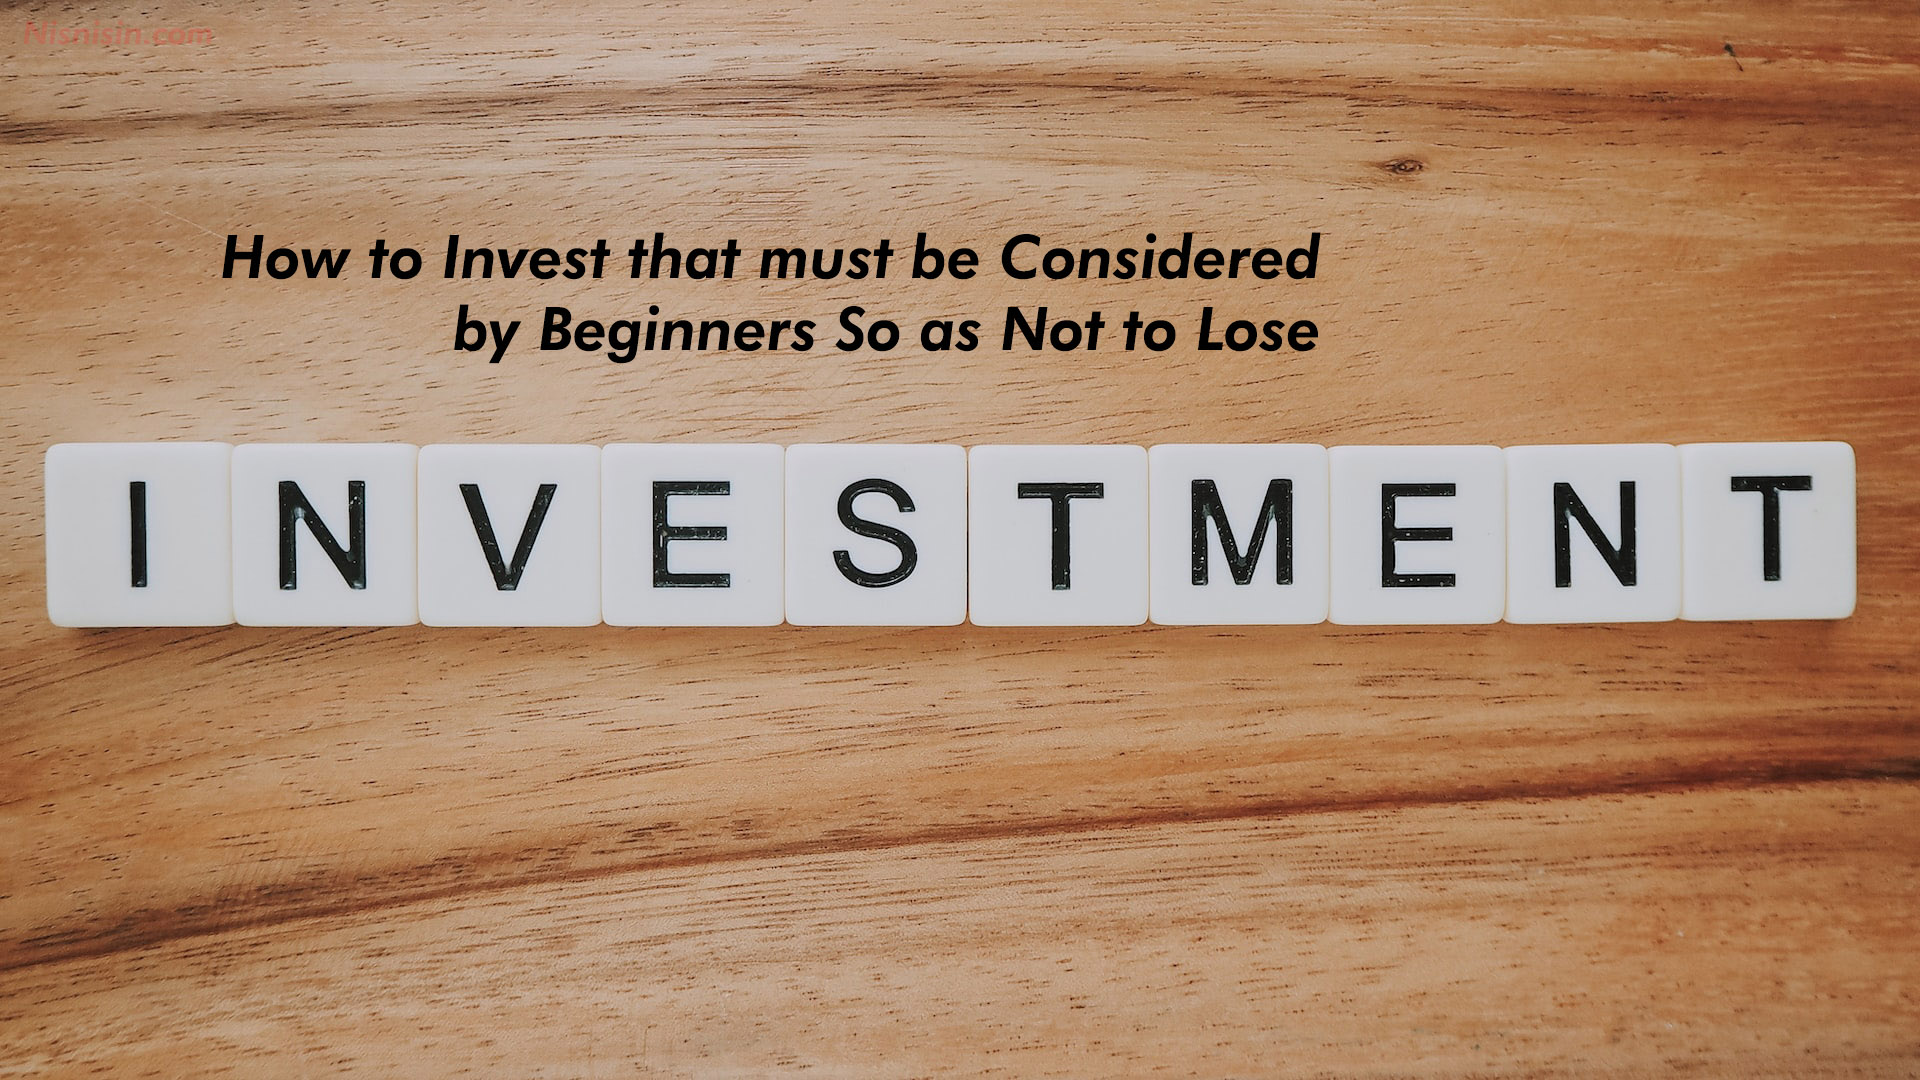 How to Invest that must be Considered by Beginners